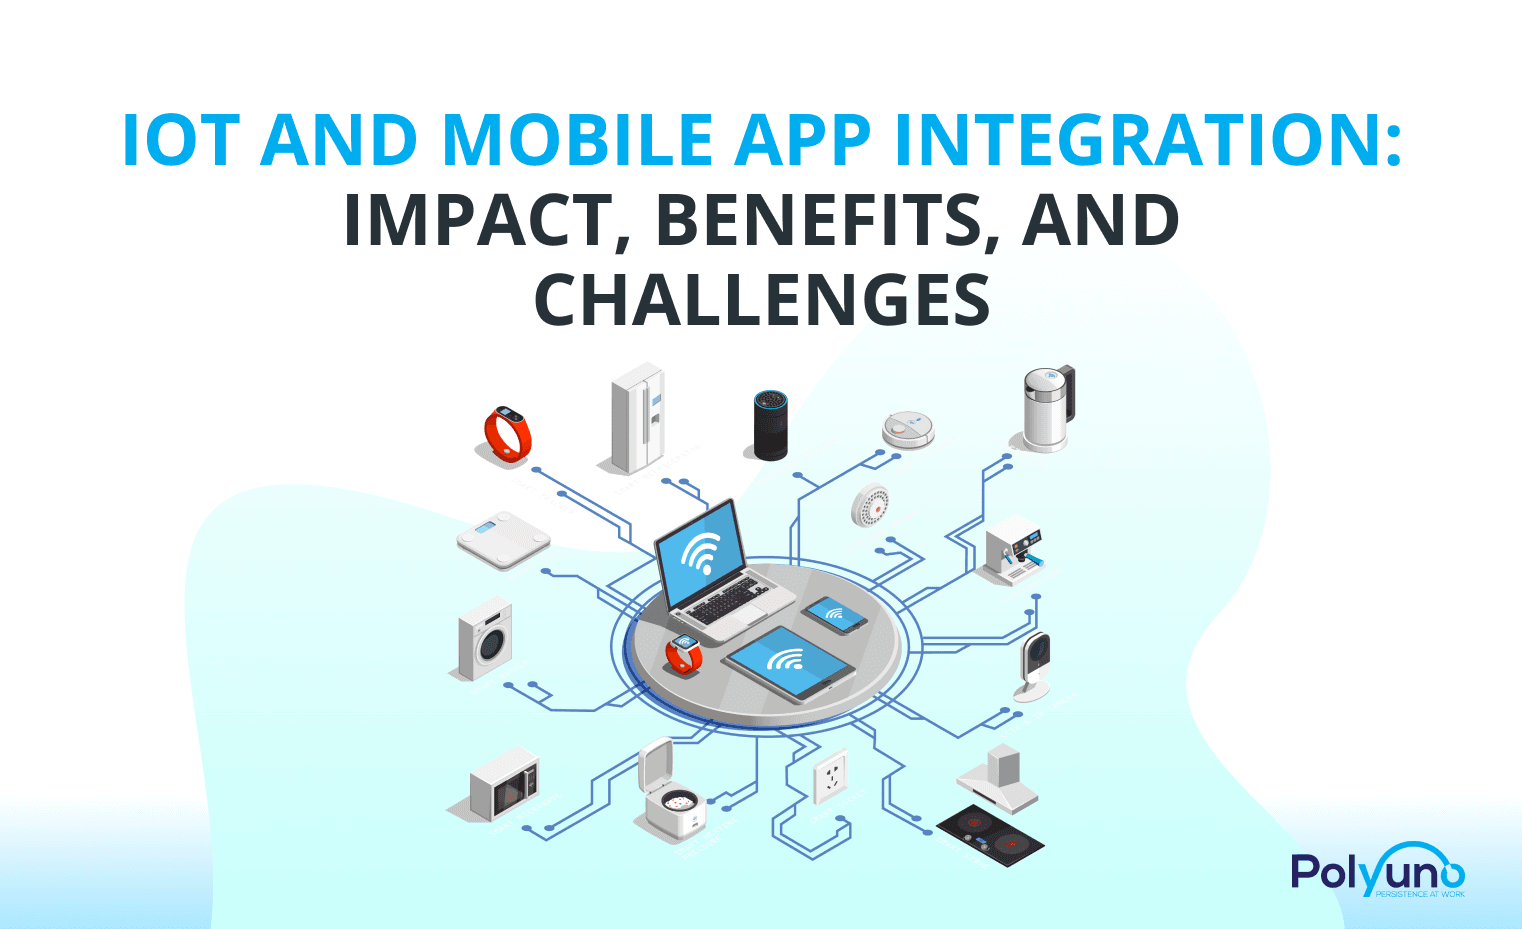 IoT And Mobile App Integration: Impact, Benefits, And Challenges